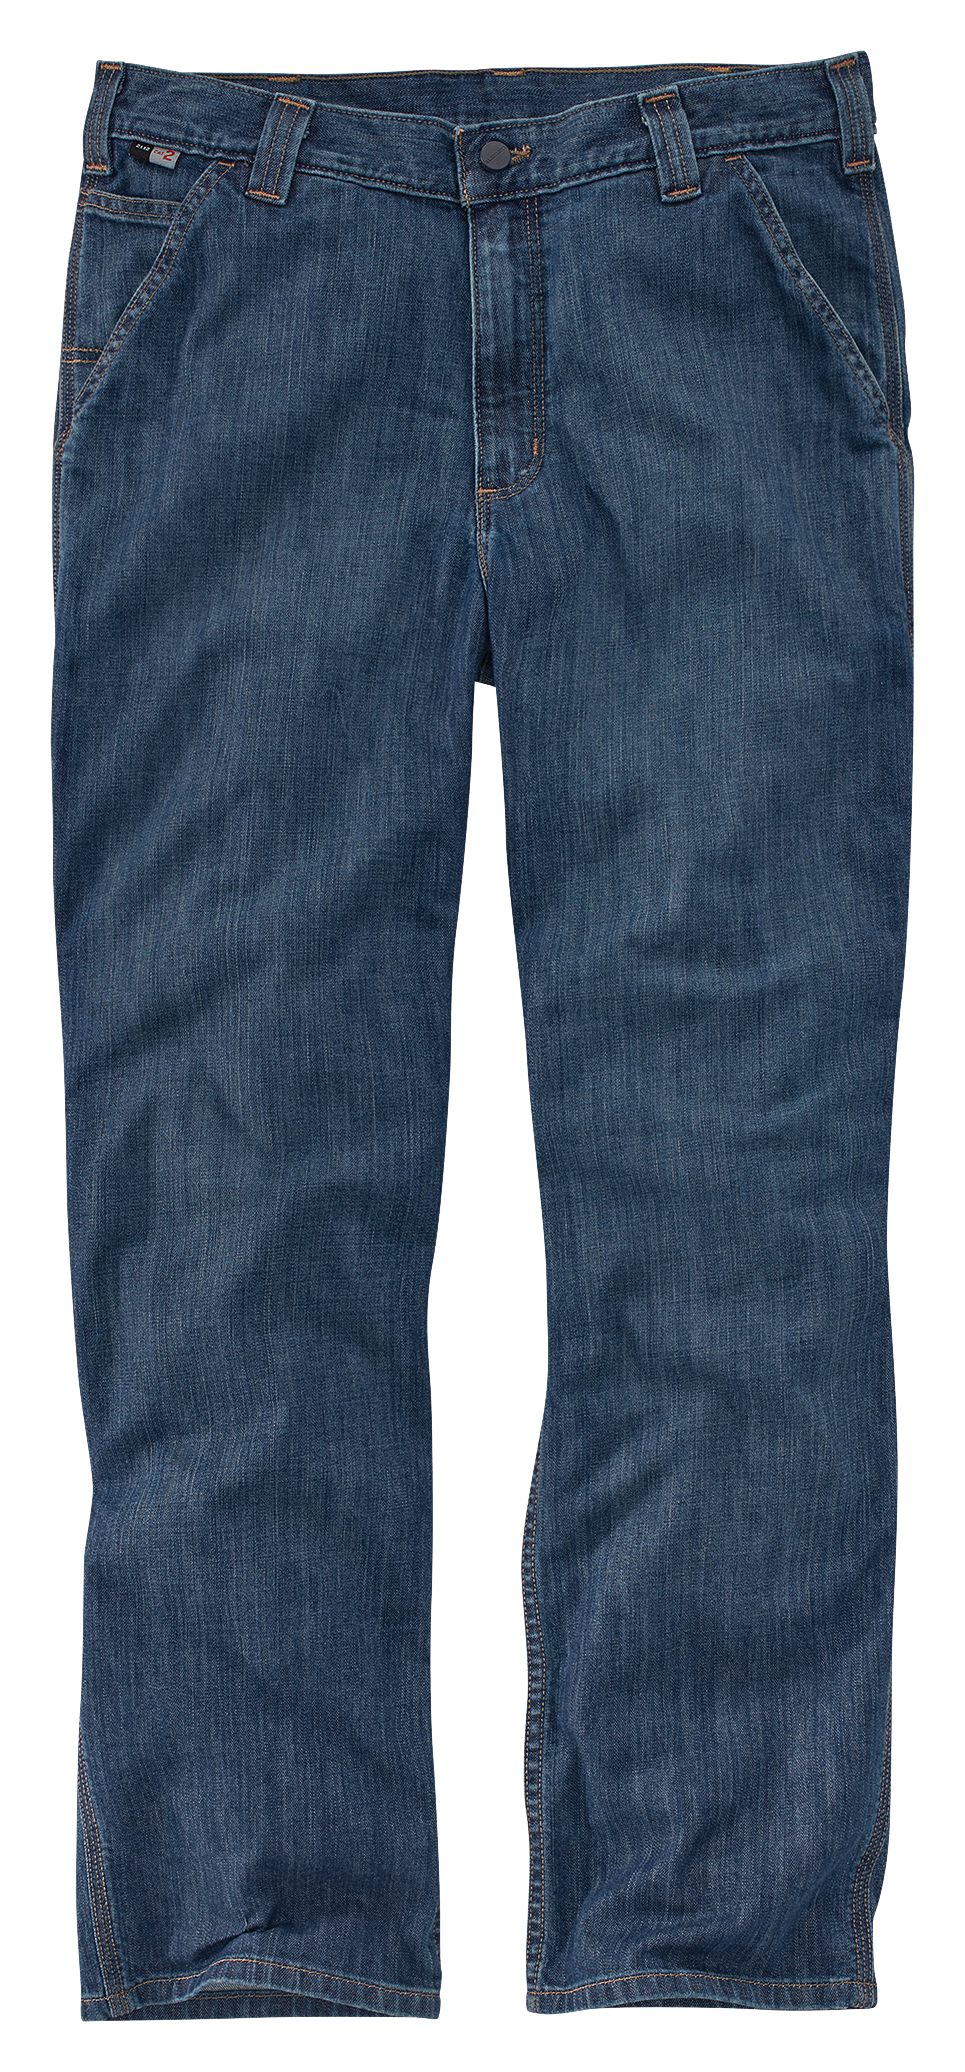 Carhartt Flame-Resistant Force Rugged Flex Relaxed-Fit Utility Jeans for Men